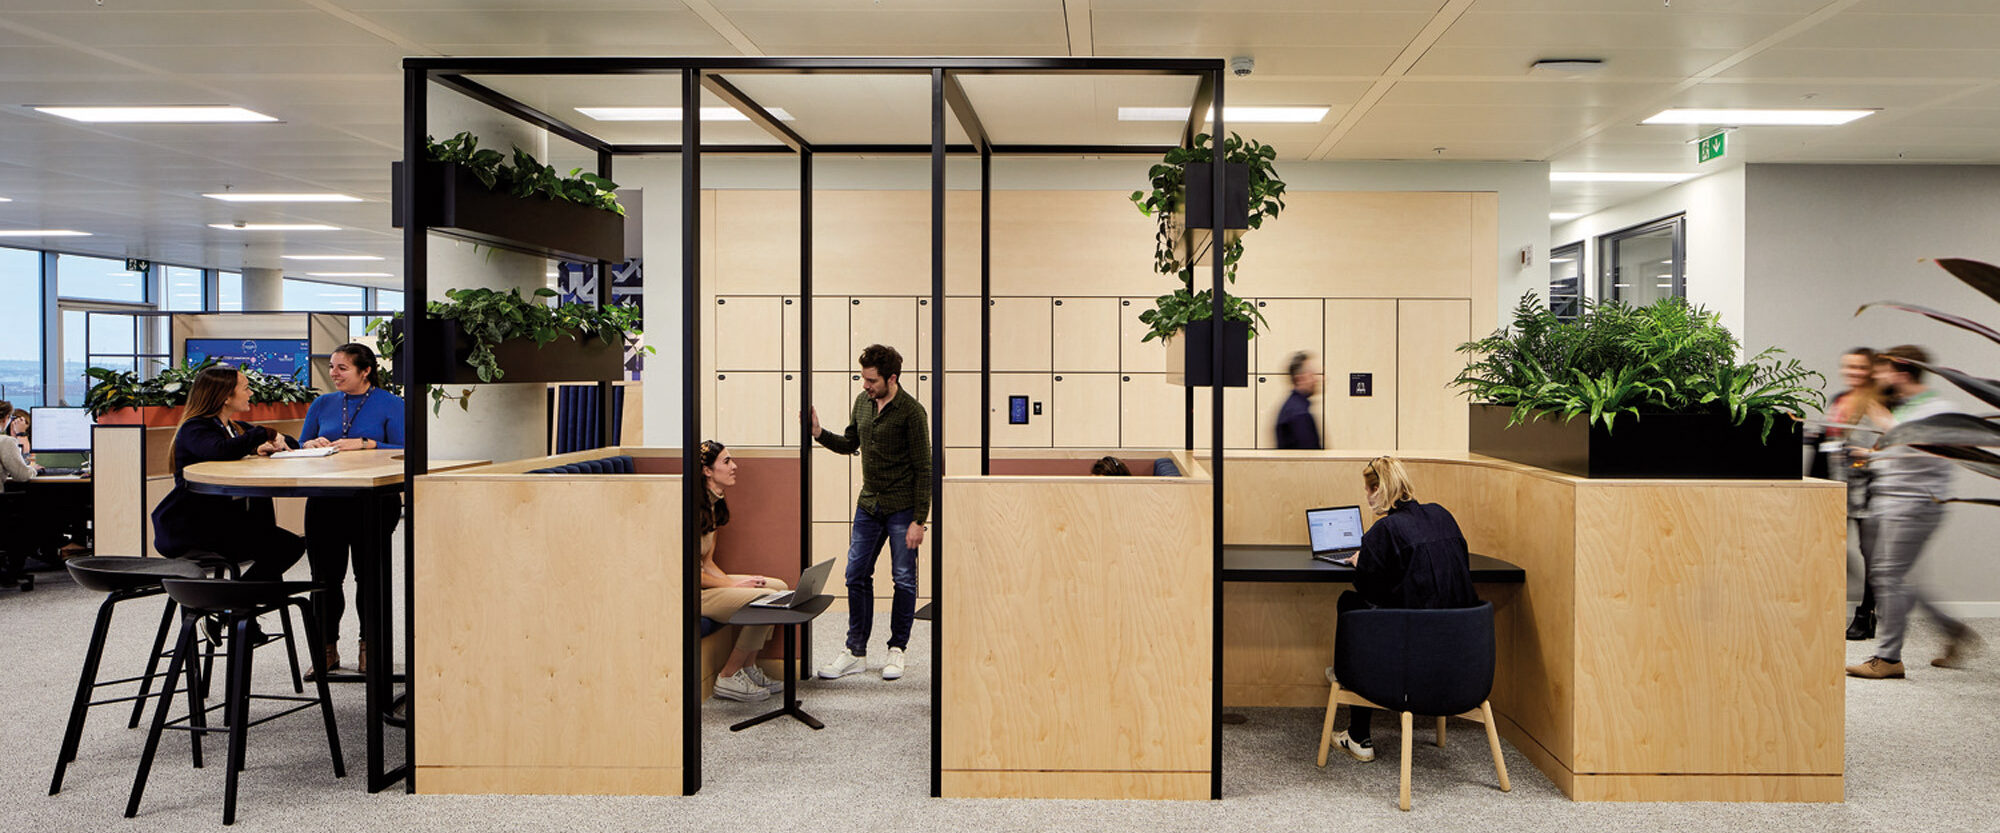 Modern open-plan office space featuring wood-toned privacy booths with integrated plant decor. Employees collaborate and focus on tasks, highlighting a balance of communal and individual work dynamics.